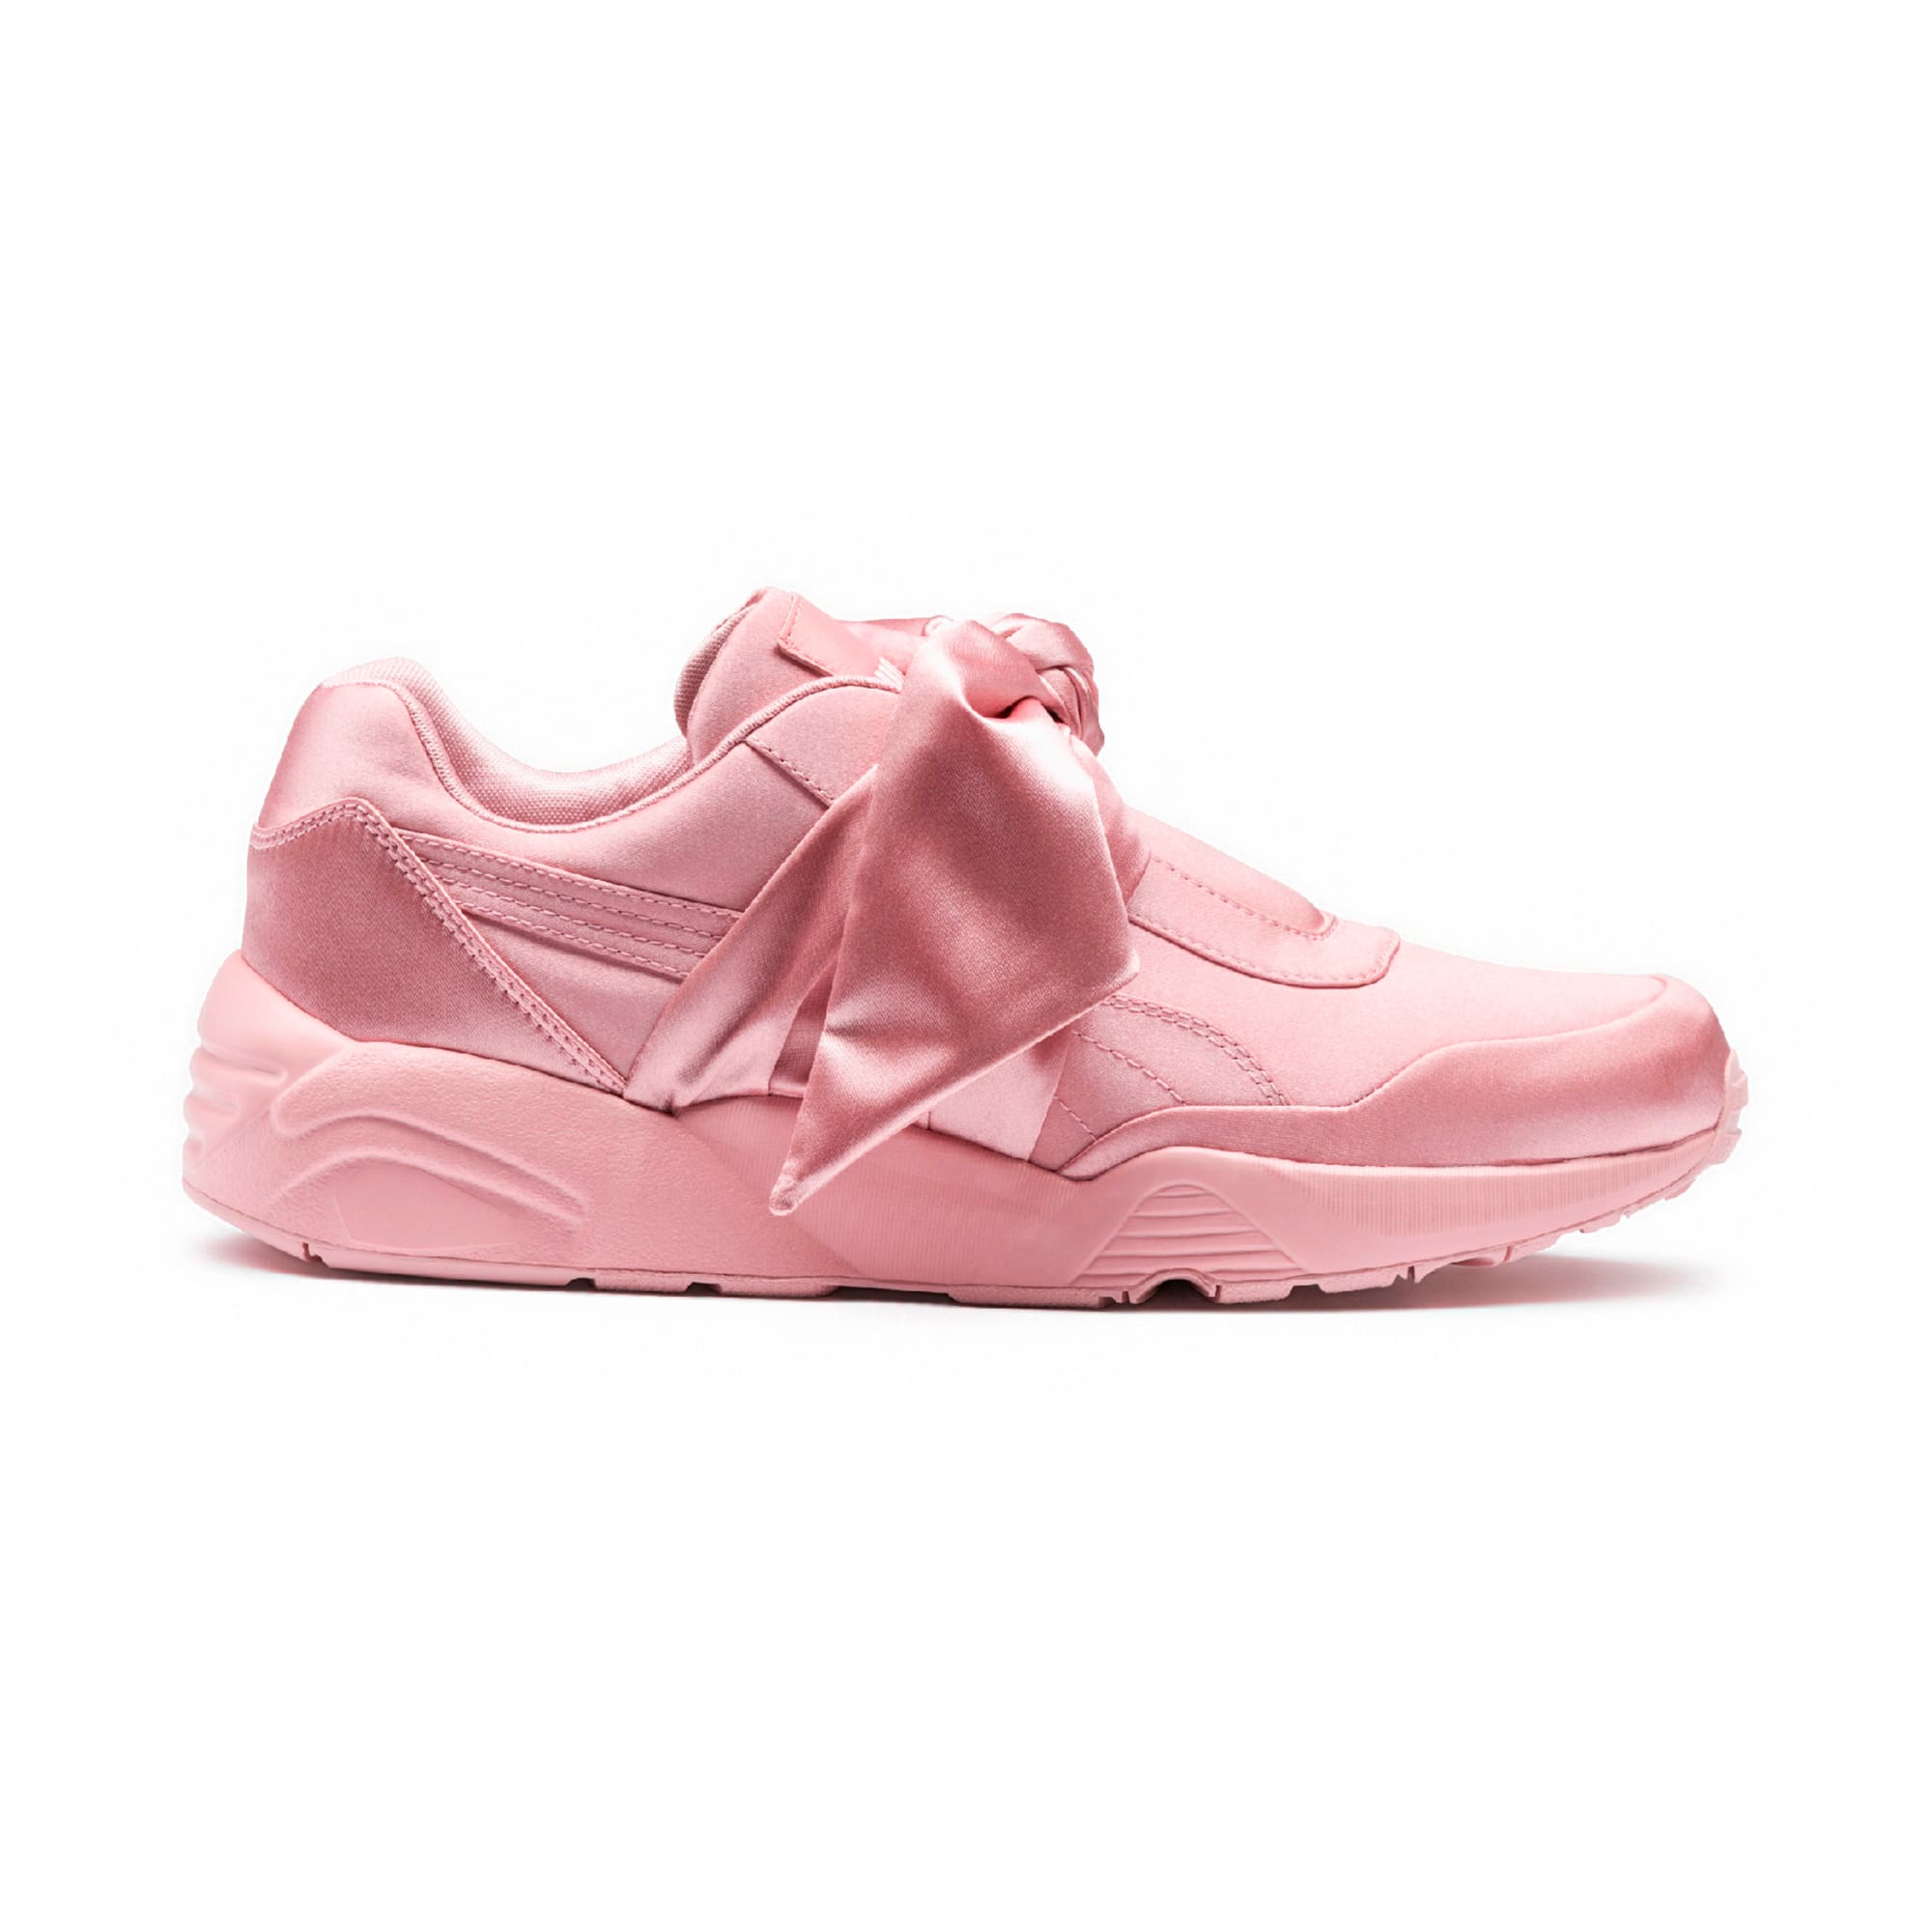 pink puma shoes with bow